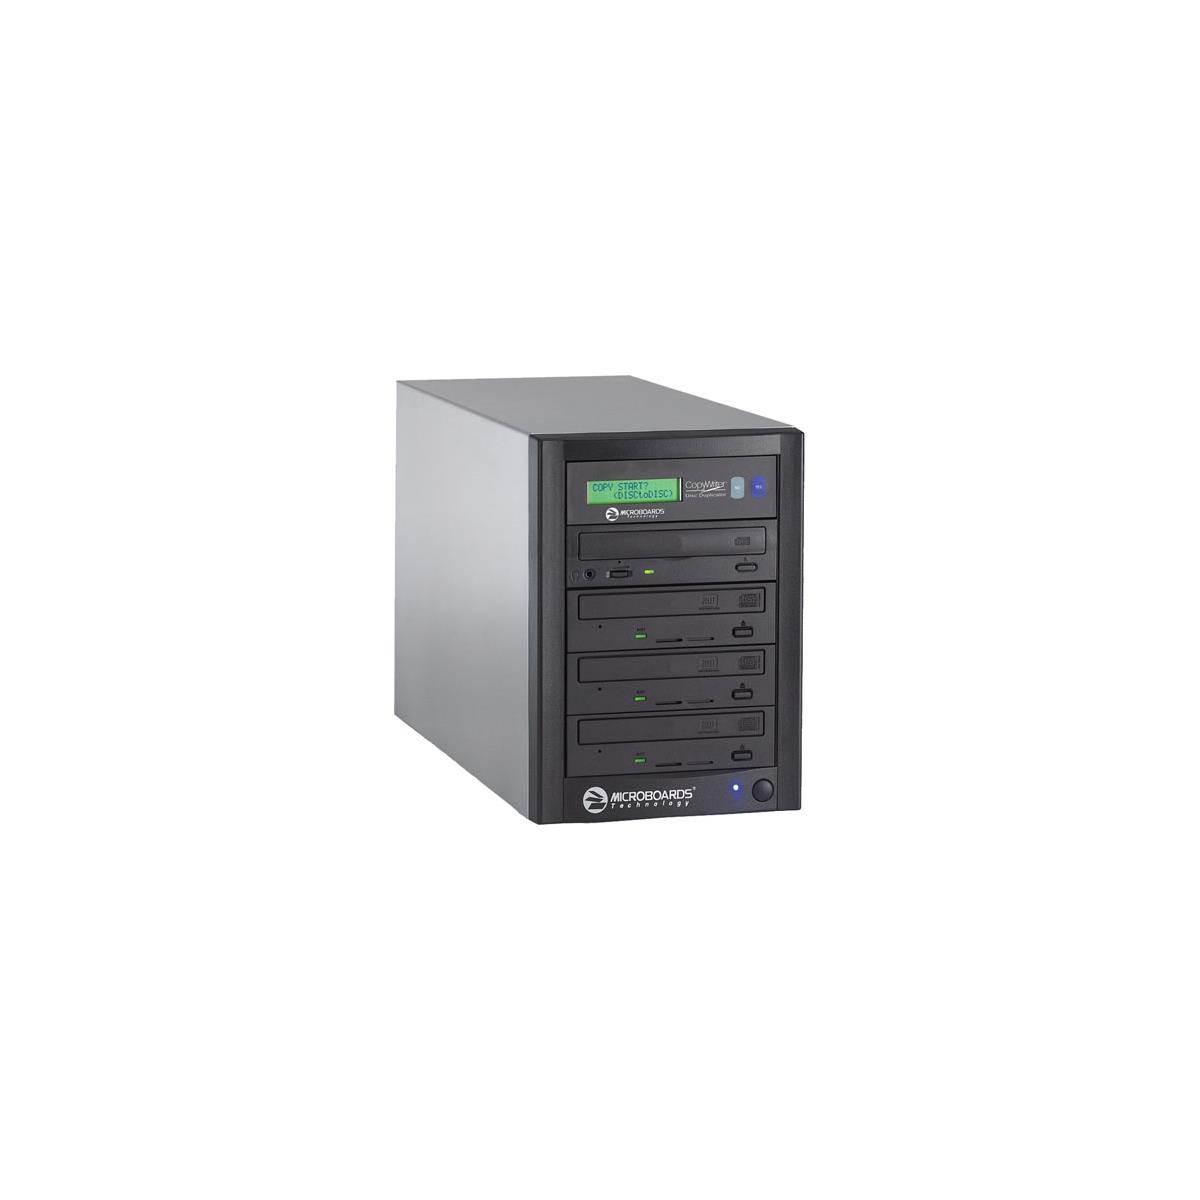 Image of Microboards Technology Quick Disc DVD-123 1 to 3 Stand Alone DVD/CD Duplicator